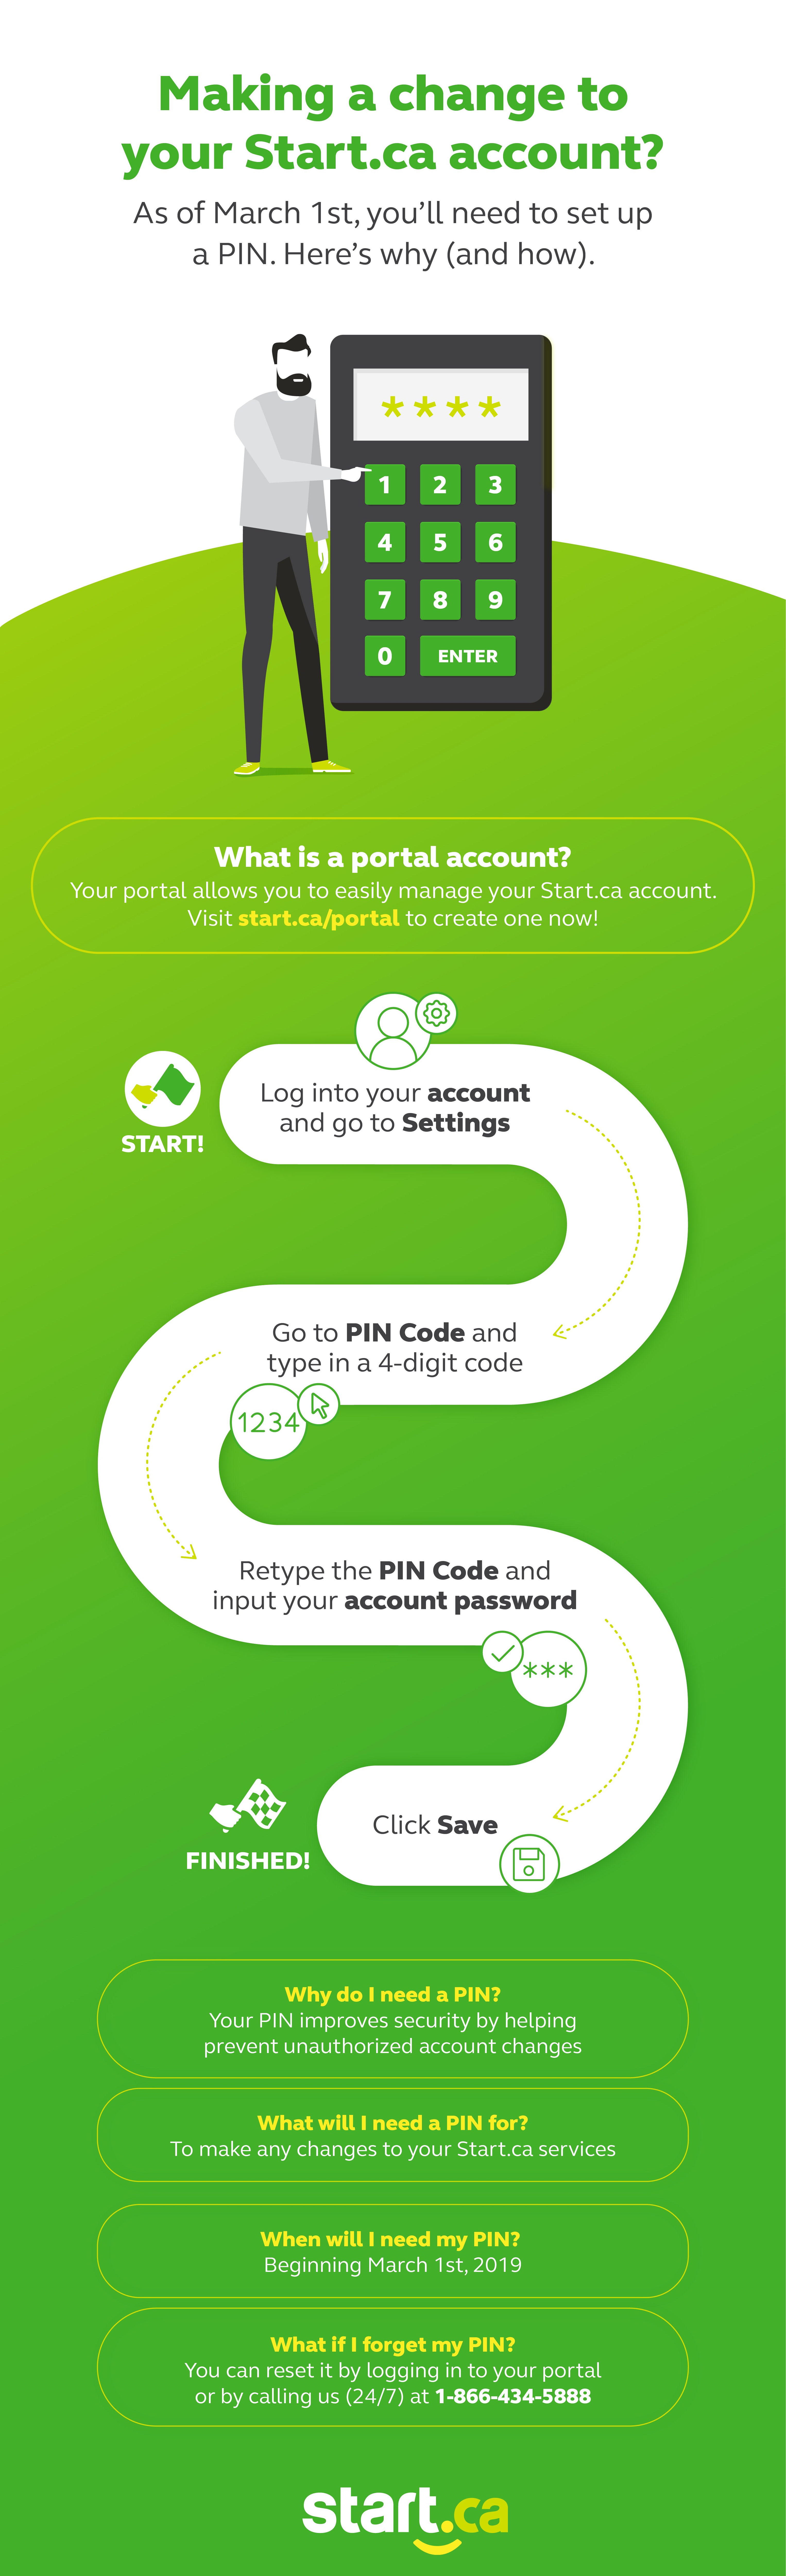 pin code security infographic. 1. Login to your account and go to settings. 2 go to PIN CODE and type in 4-digit code 3. Re-type your PIN code and input your account password. 4. Click Save